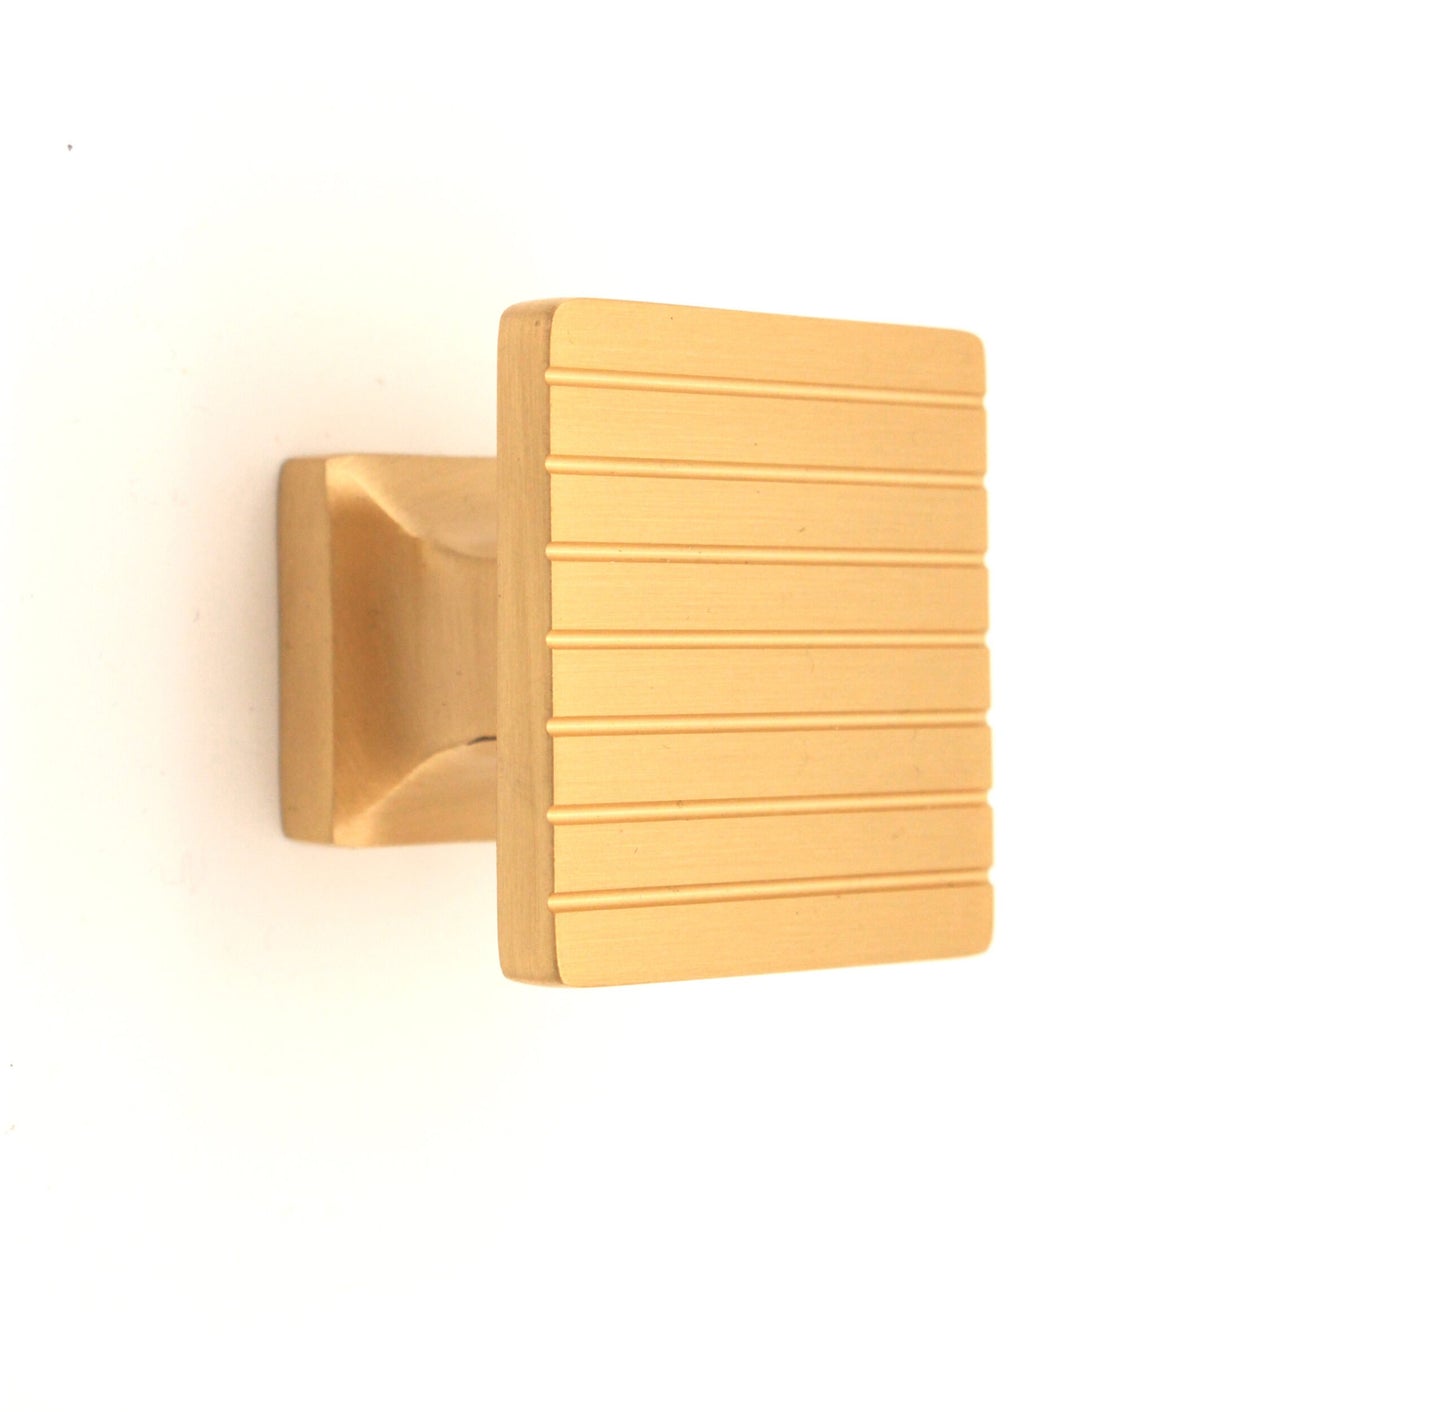 Striped Brass Cabinet Handles - Small